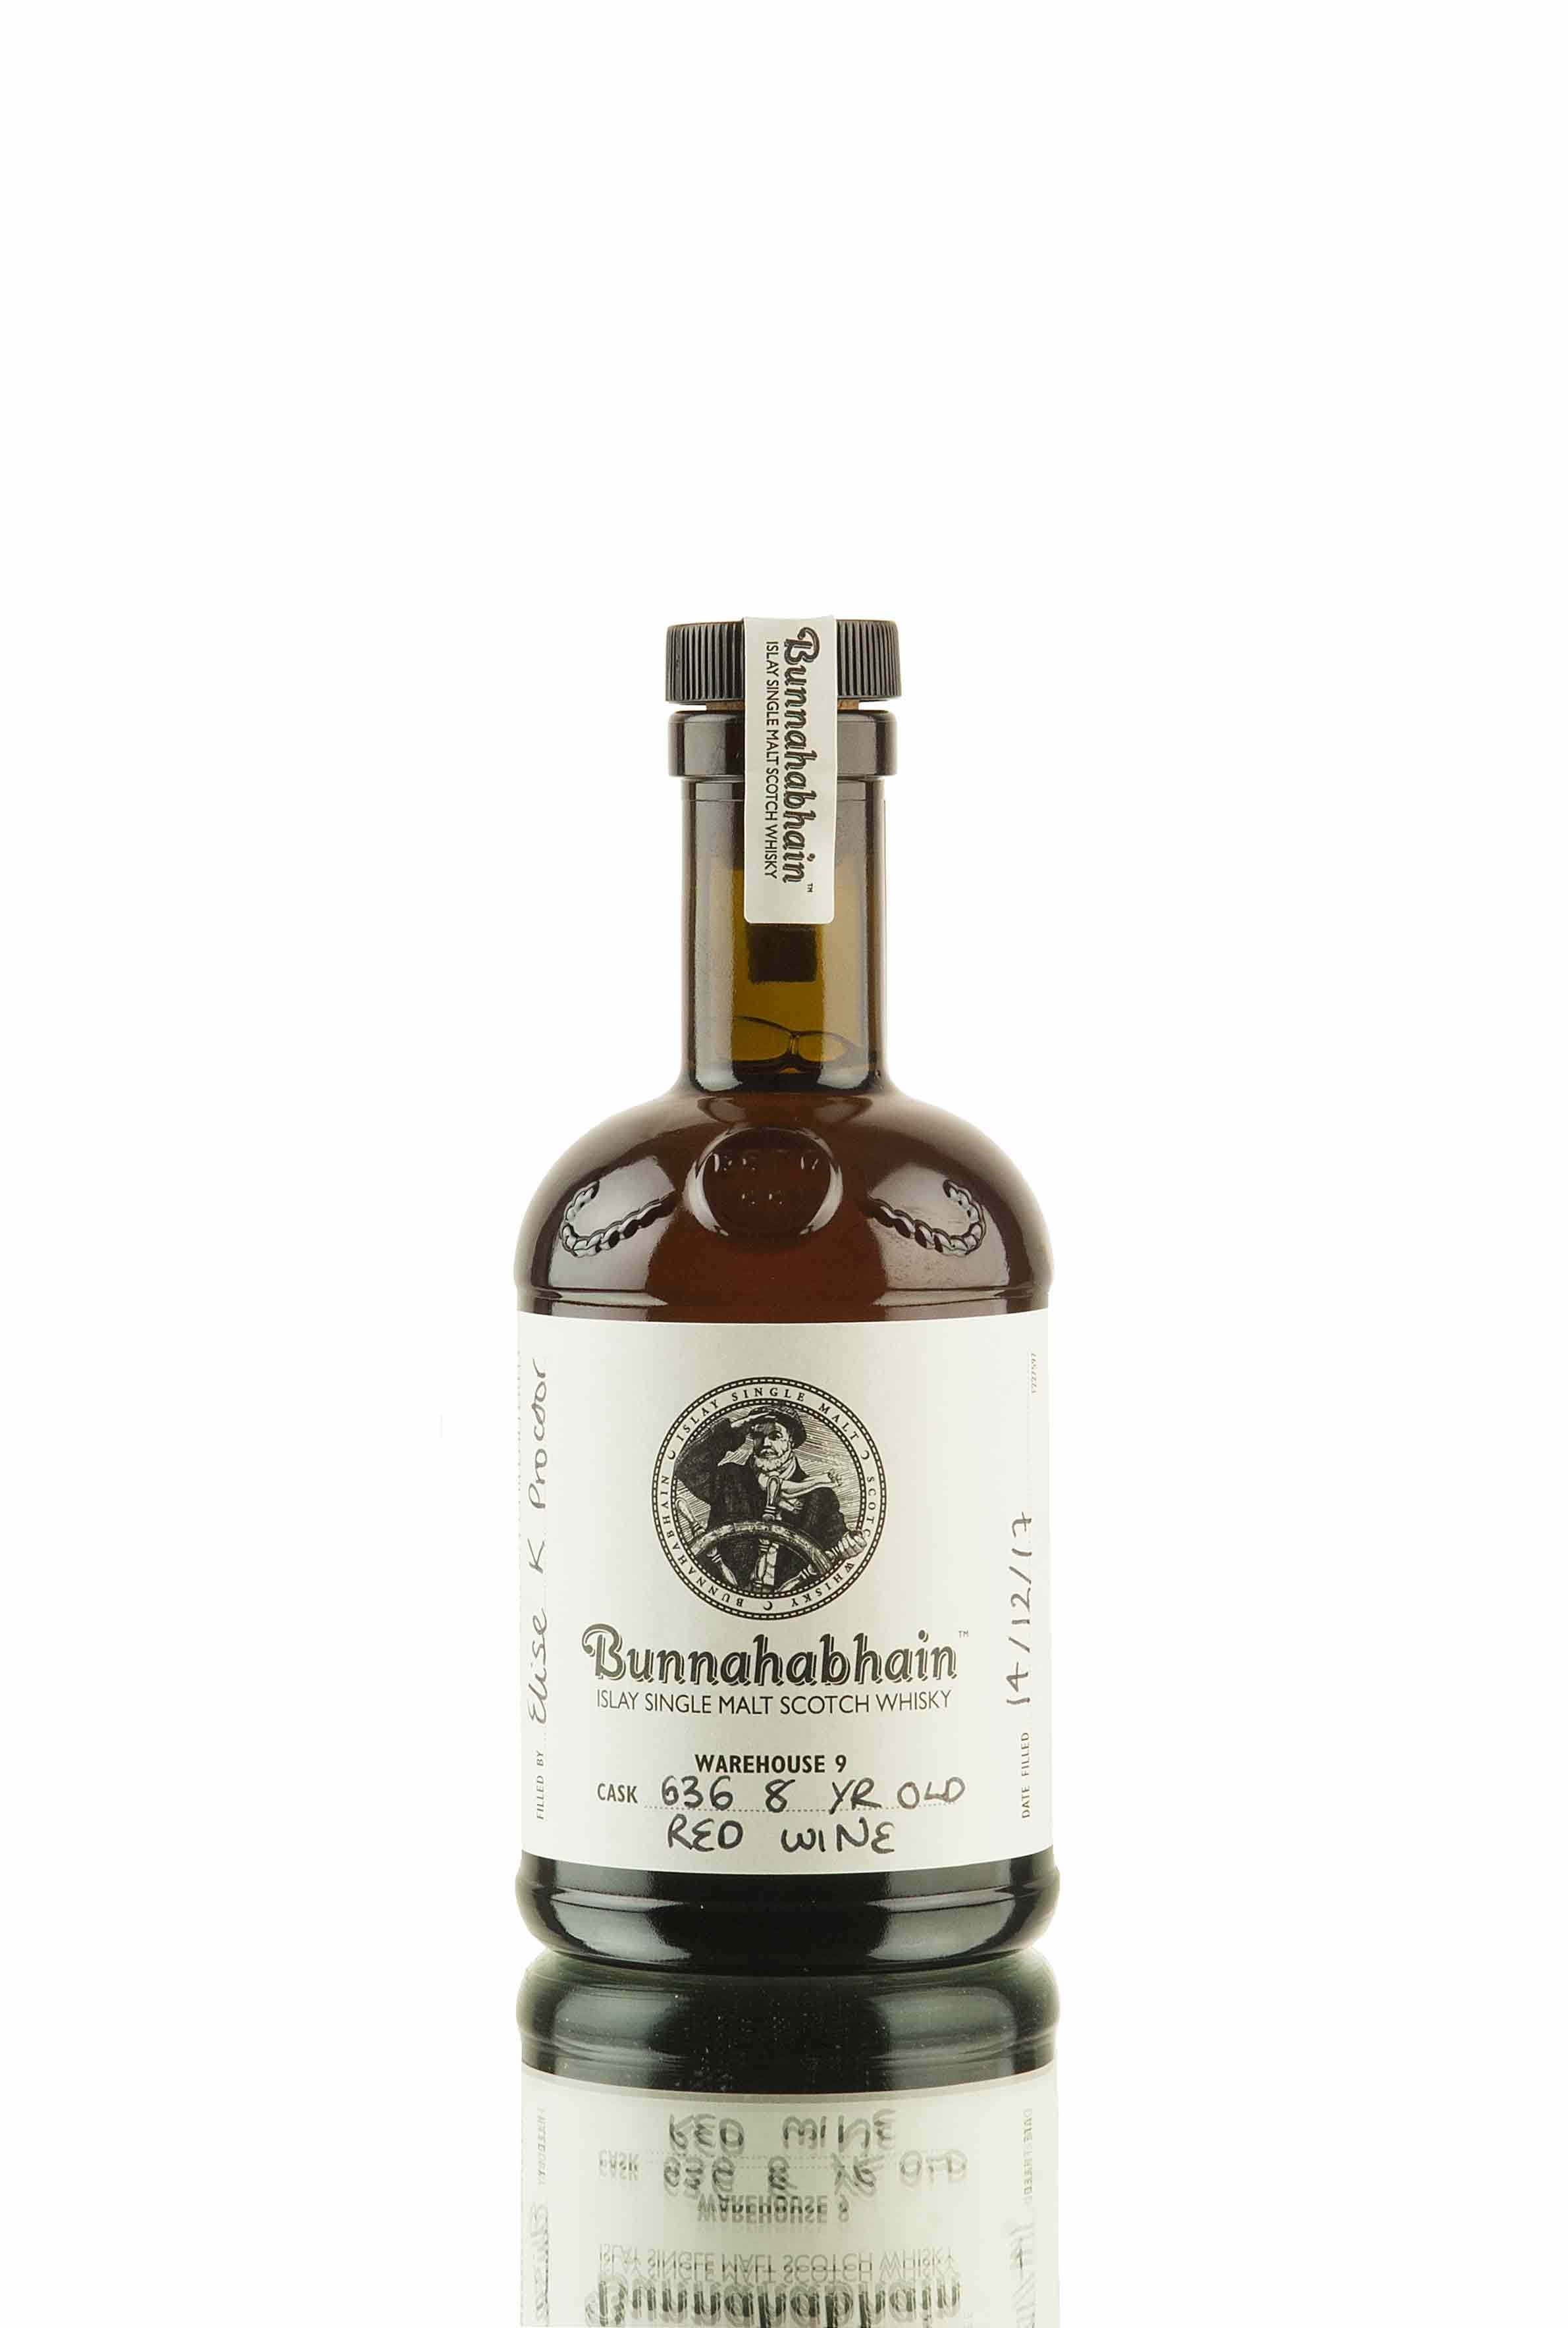 Bunnahabhain Hand Filled Exclusive | Red Wine Cask 636 (20cl)